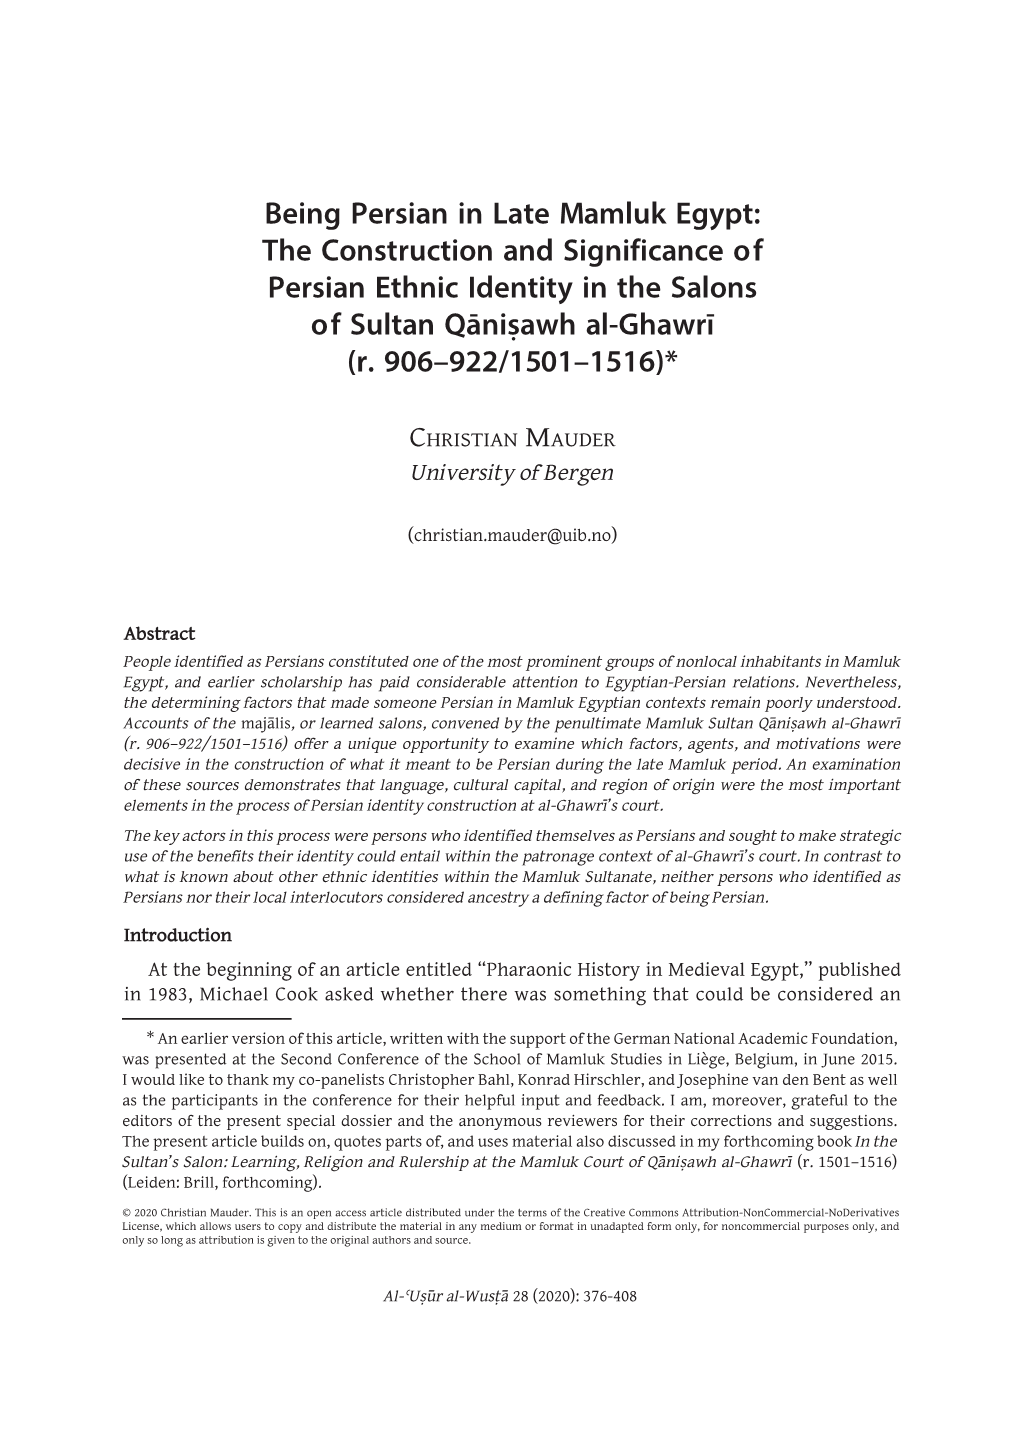 Being Persian in Late Mamluk Egypt: the Construction and Significance of Persian Ethnic Identity in the Salons of Sultan Qāniṣawh Al-Ghawrī (R